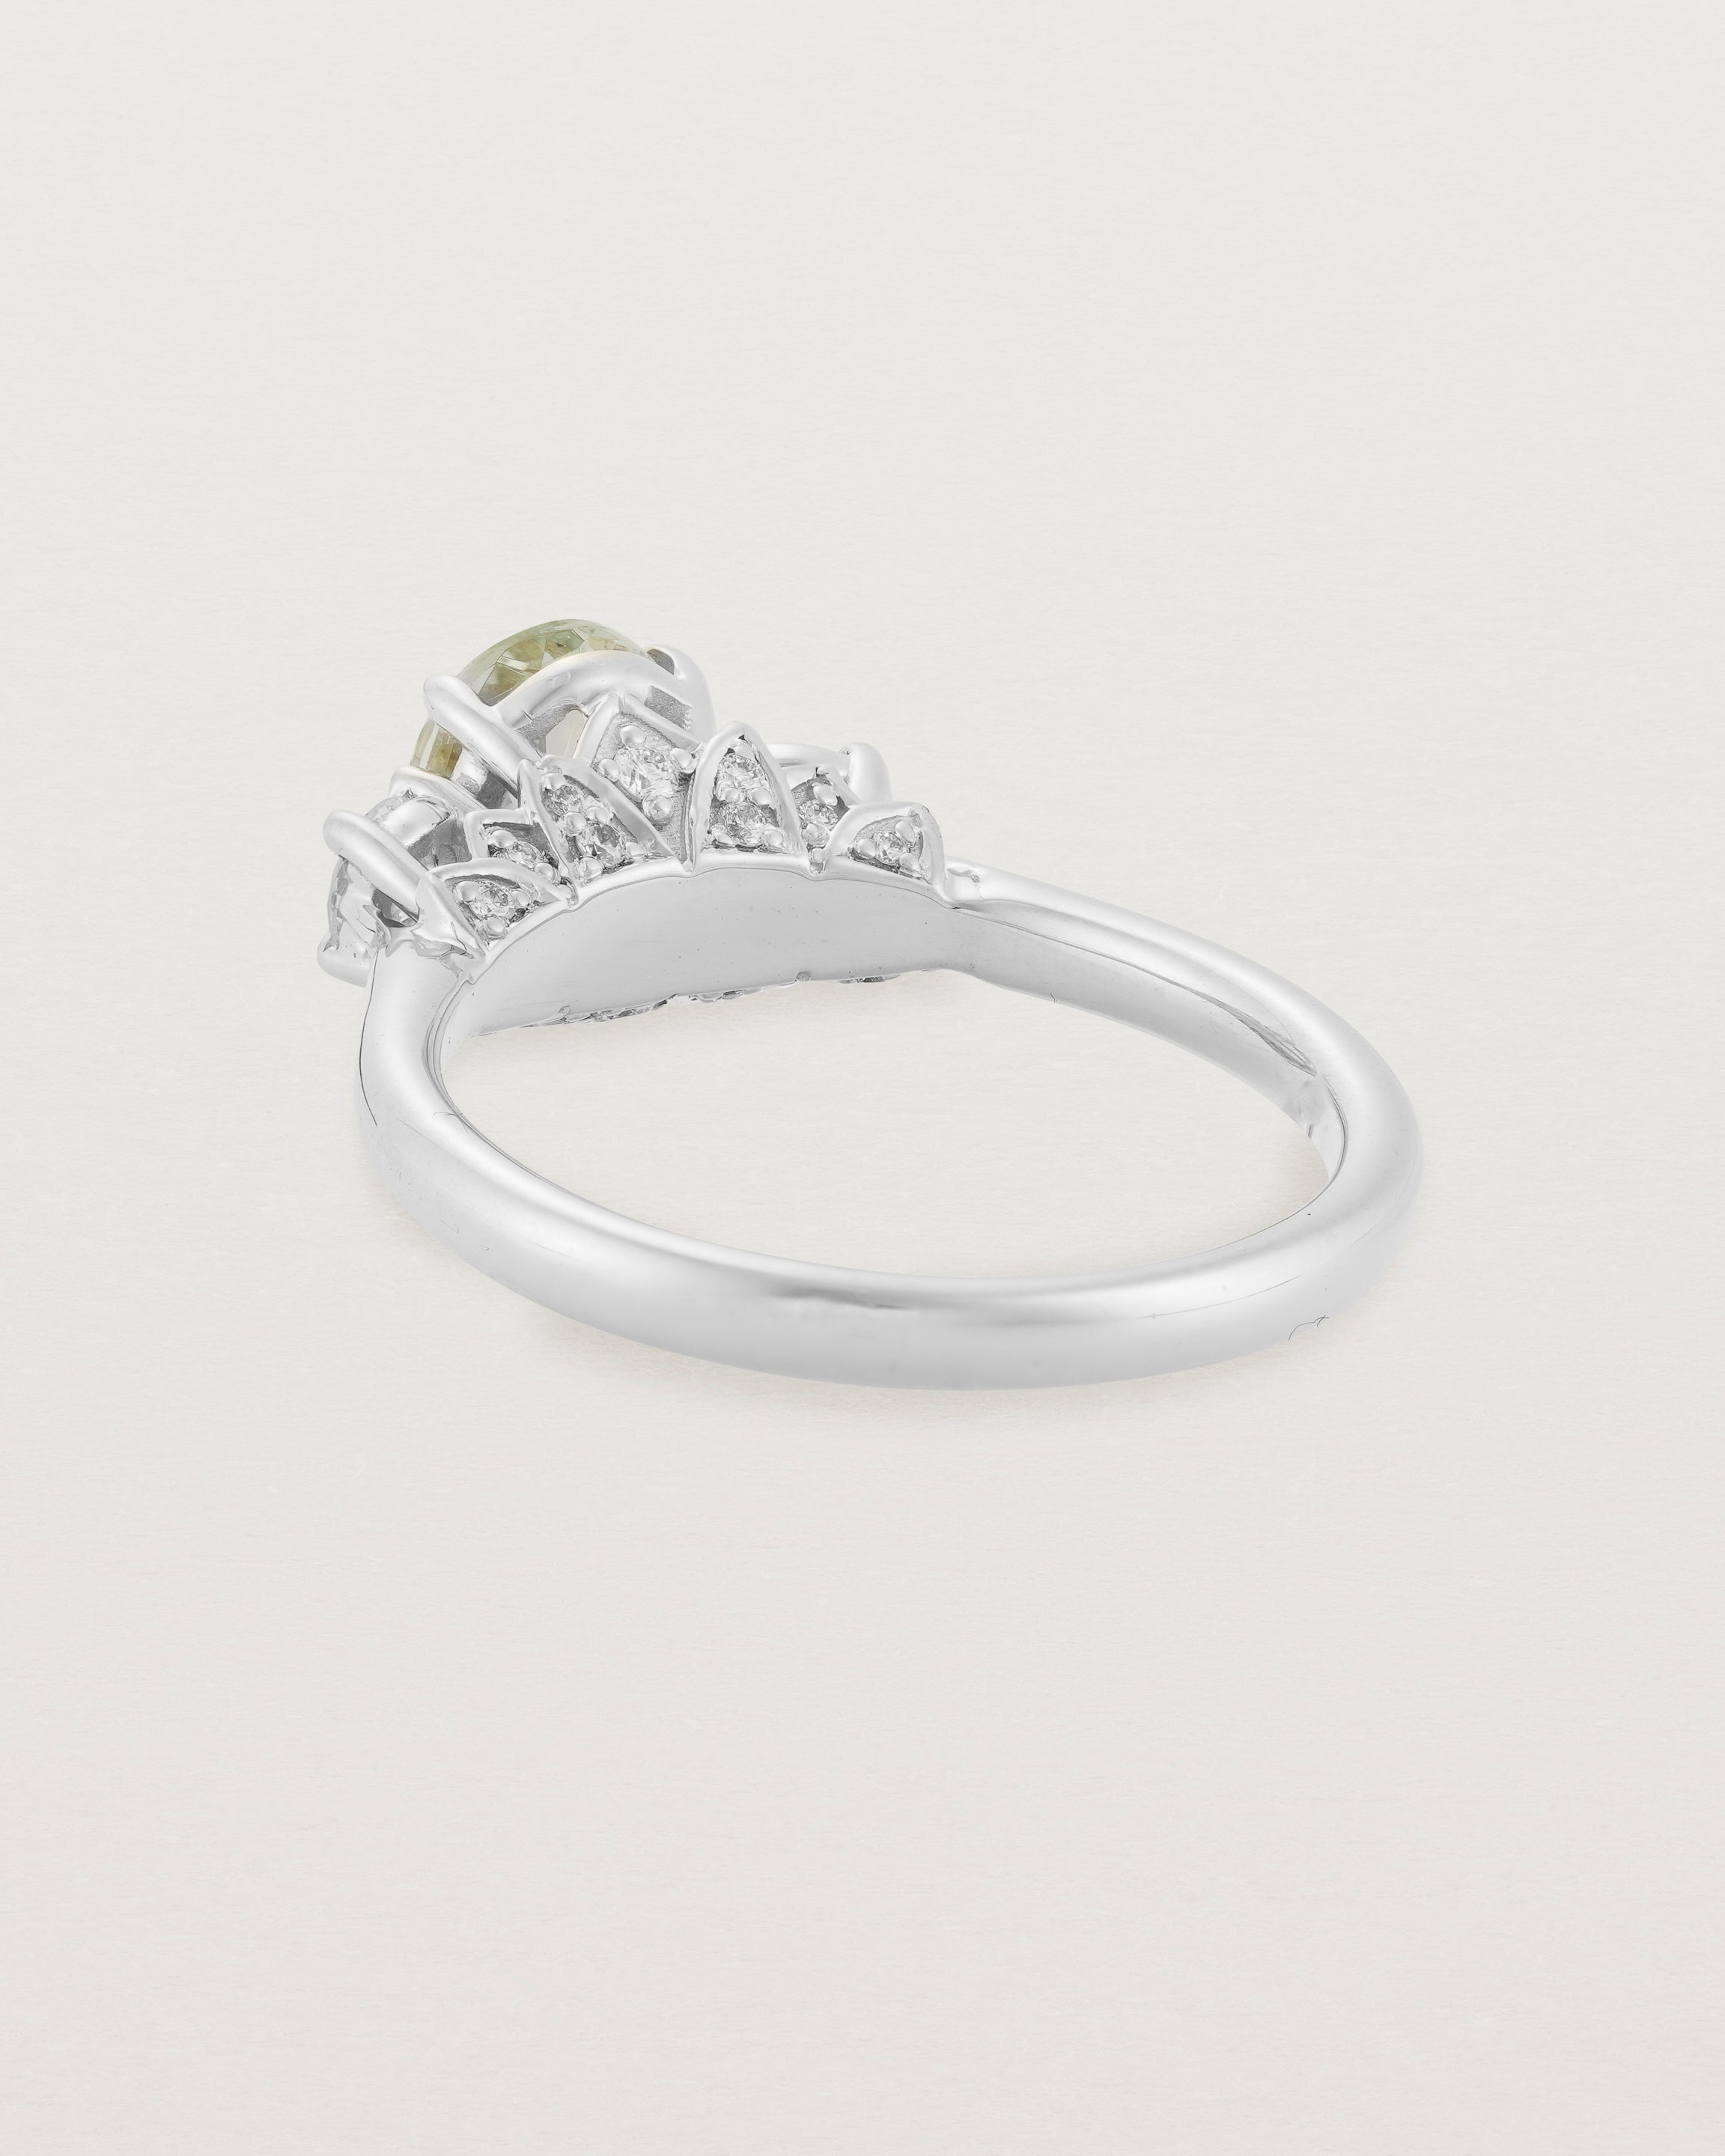 Back view of the Laurel Oval Trio Ring | Green Amethyst | White Gold.